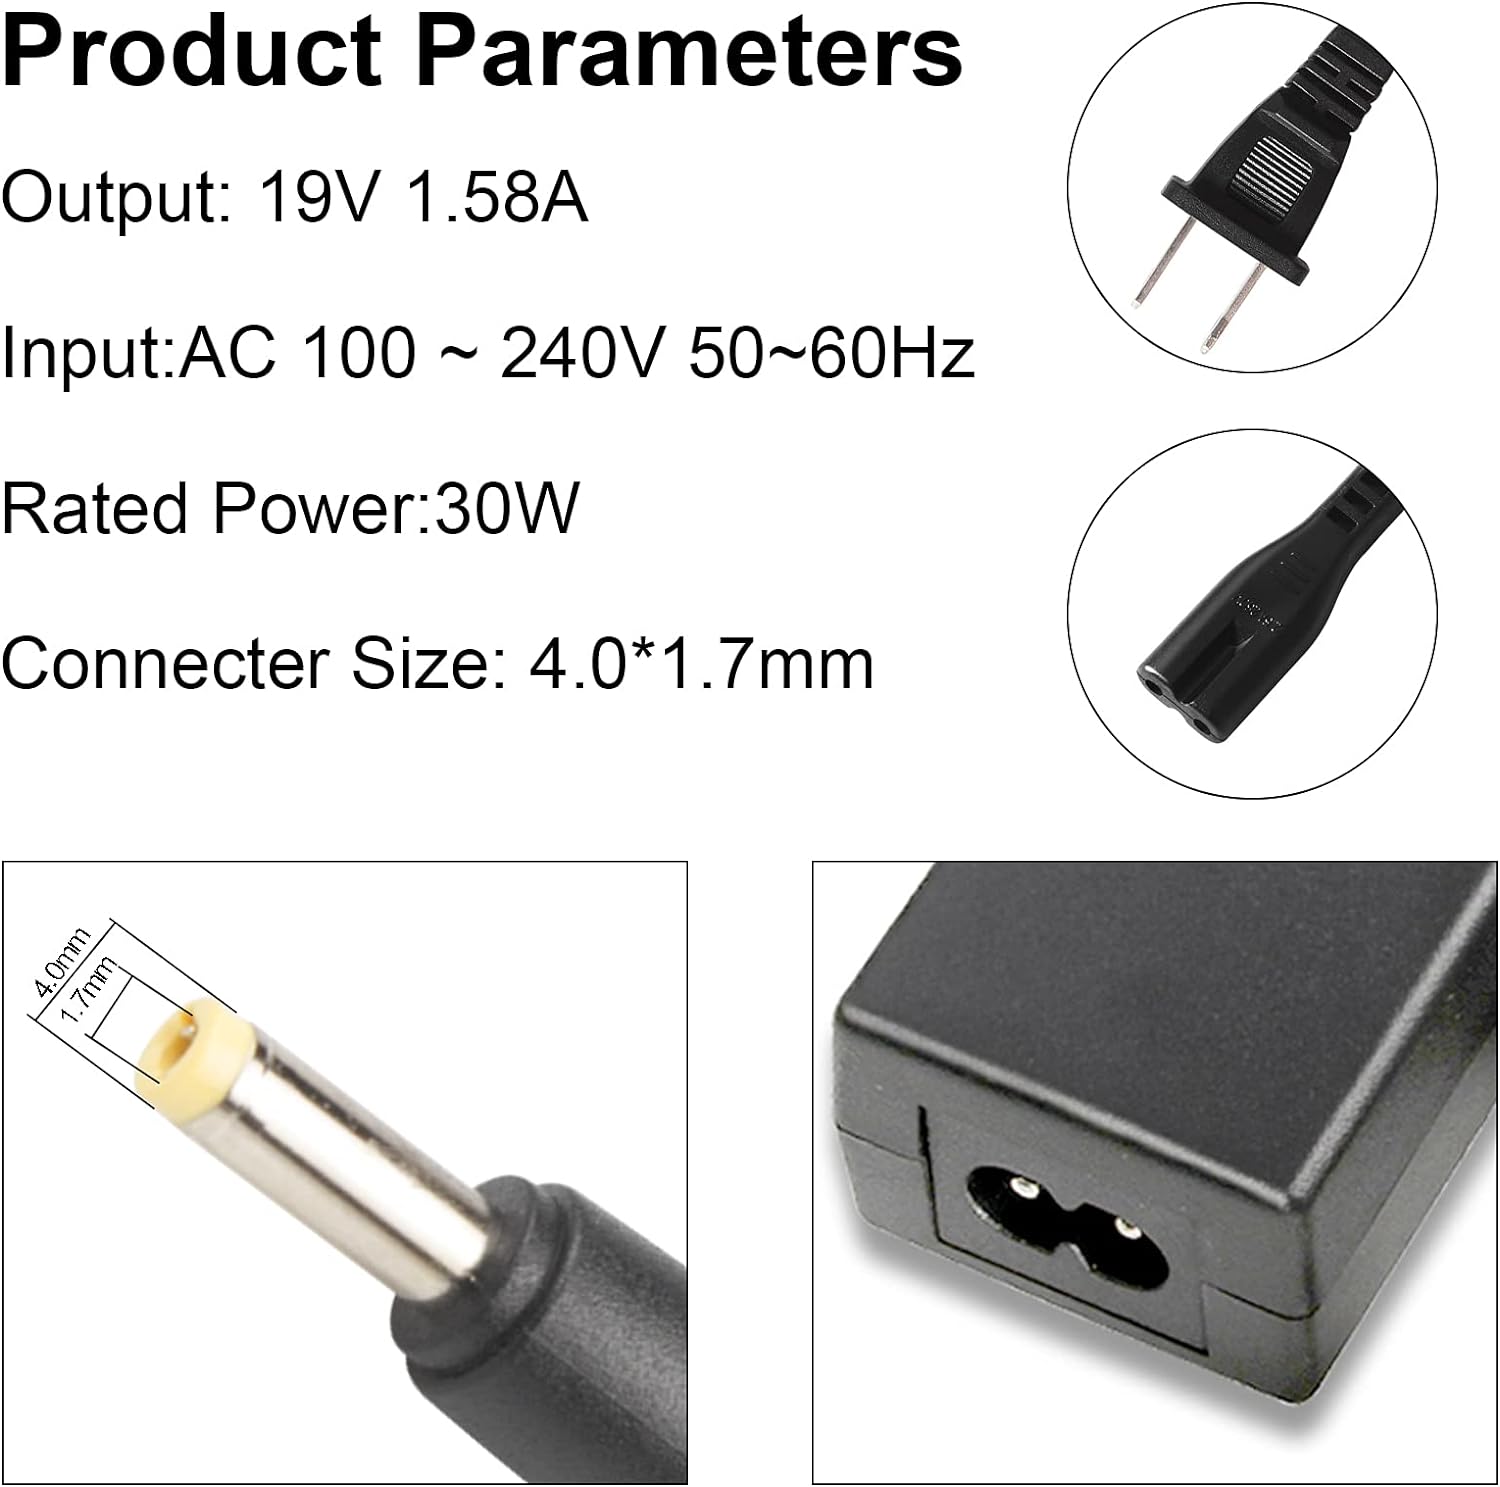 30W AC Adapter Power Charger for HP Mini 700 110 1000 1010 1100 CQ10, 496813-001 NA374AA#ABA PPP018H - 19V 1.58A - 12 Mo